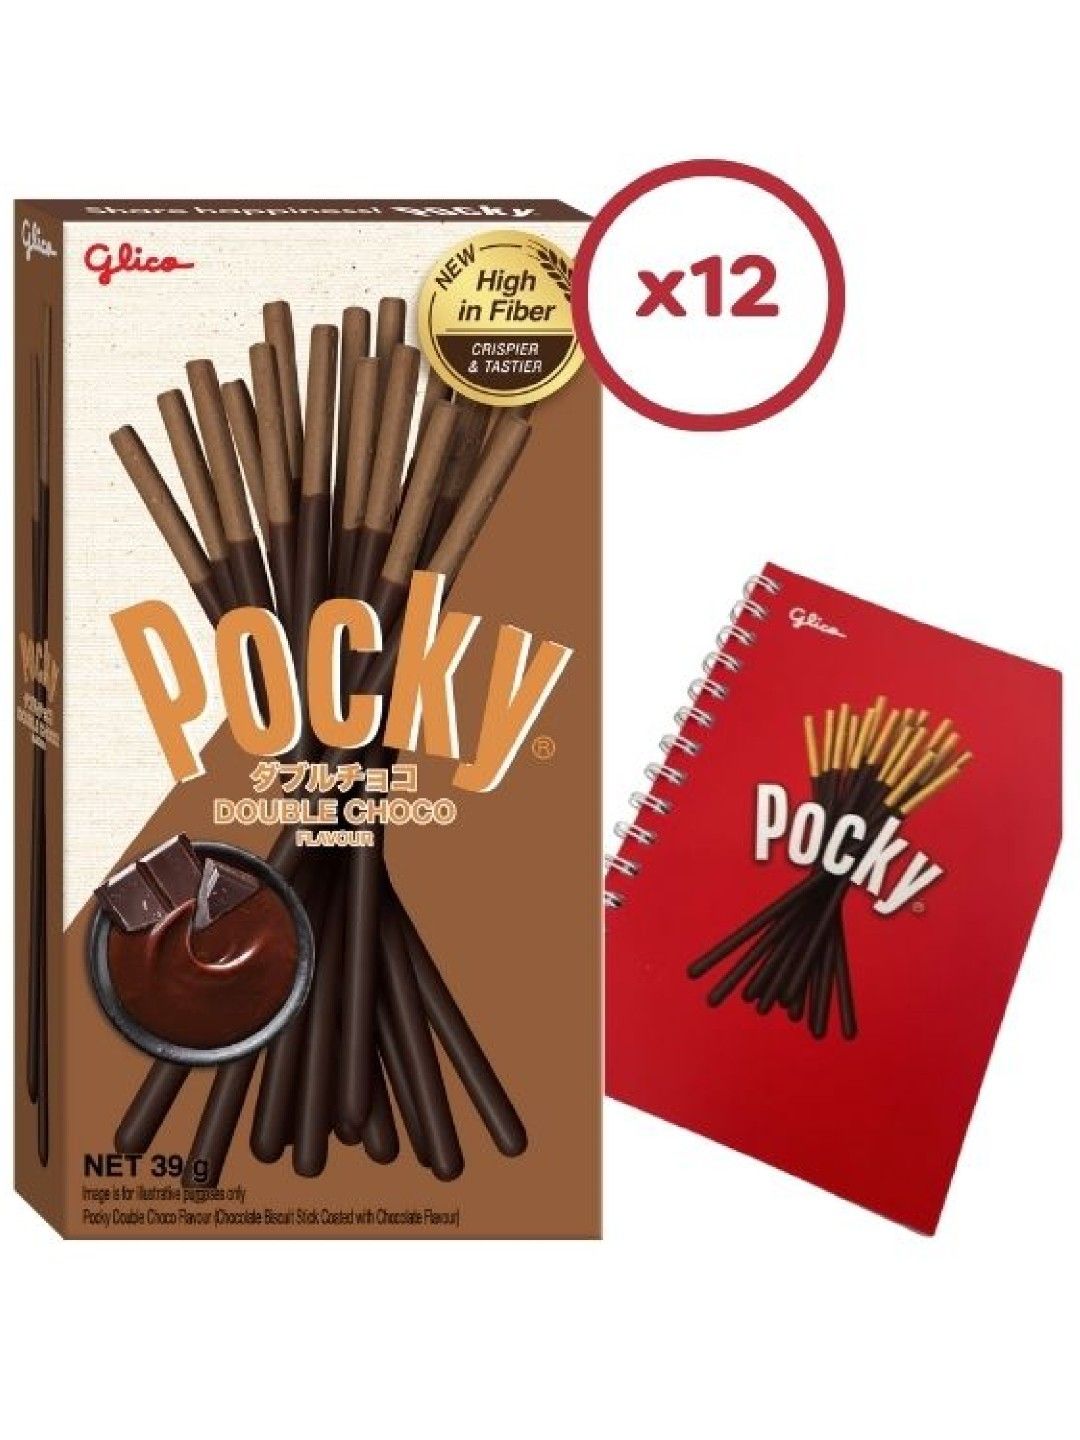 Pocky Double Choco Biscuit Sticks (Bundle of 12) with FREE Glico Notebook (No Color- Image 1)